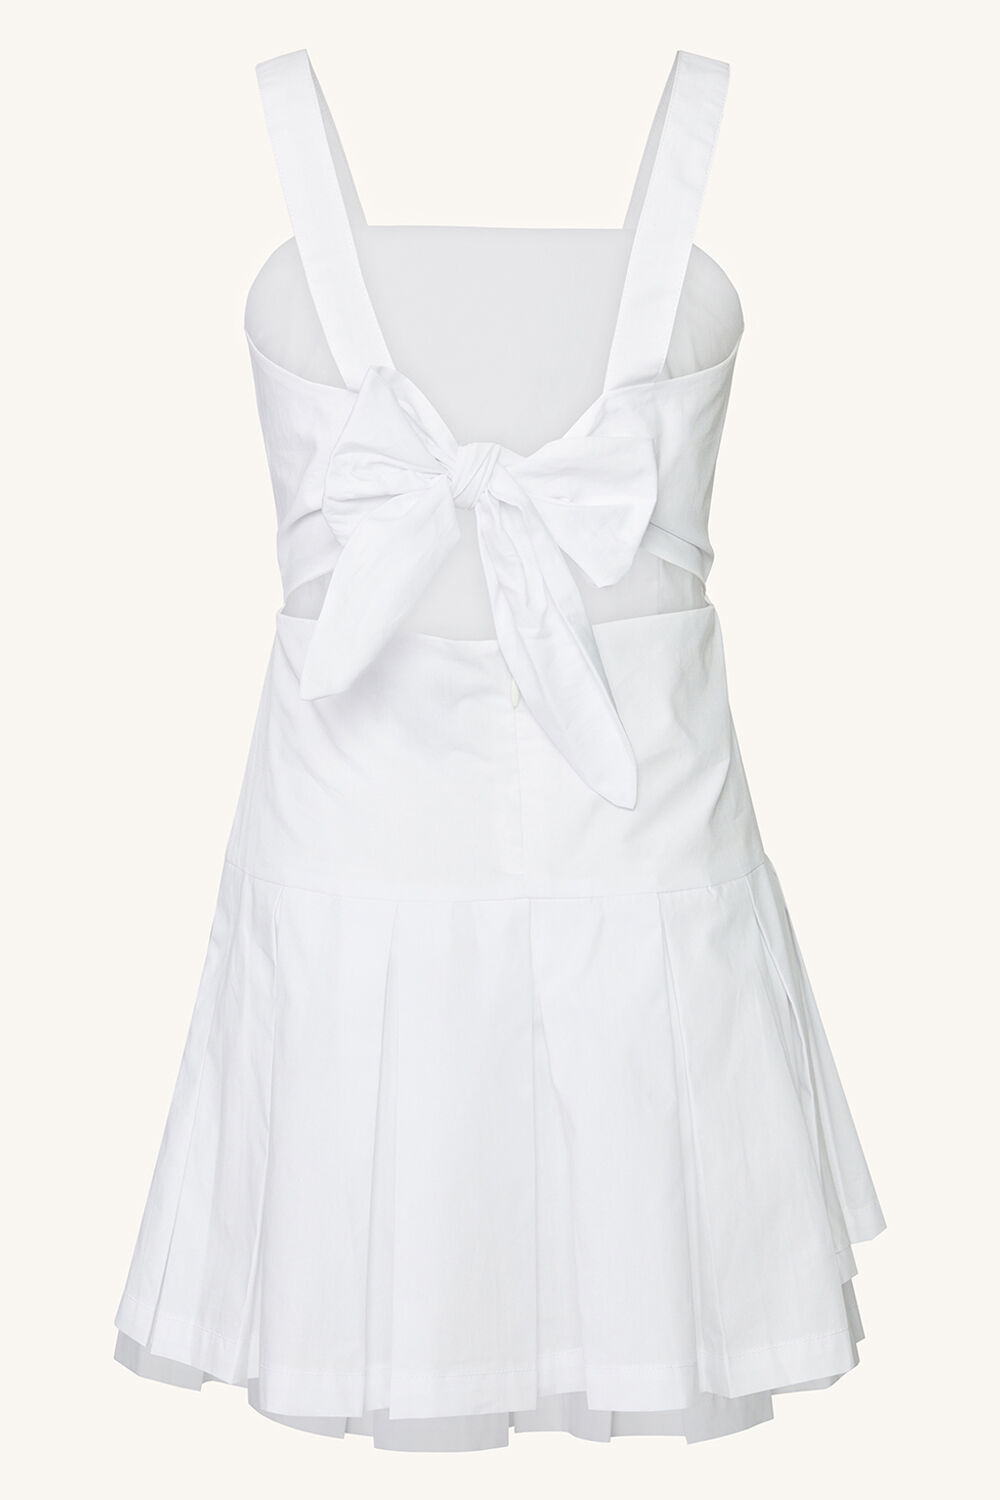 TILLY PLEAT DRESS in colour BRIGHT WHITE